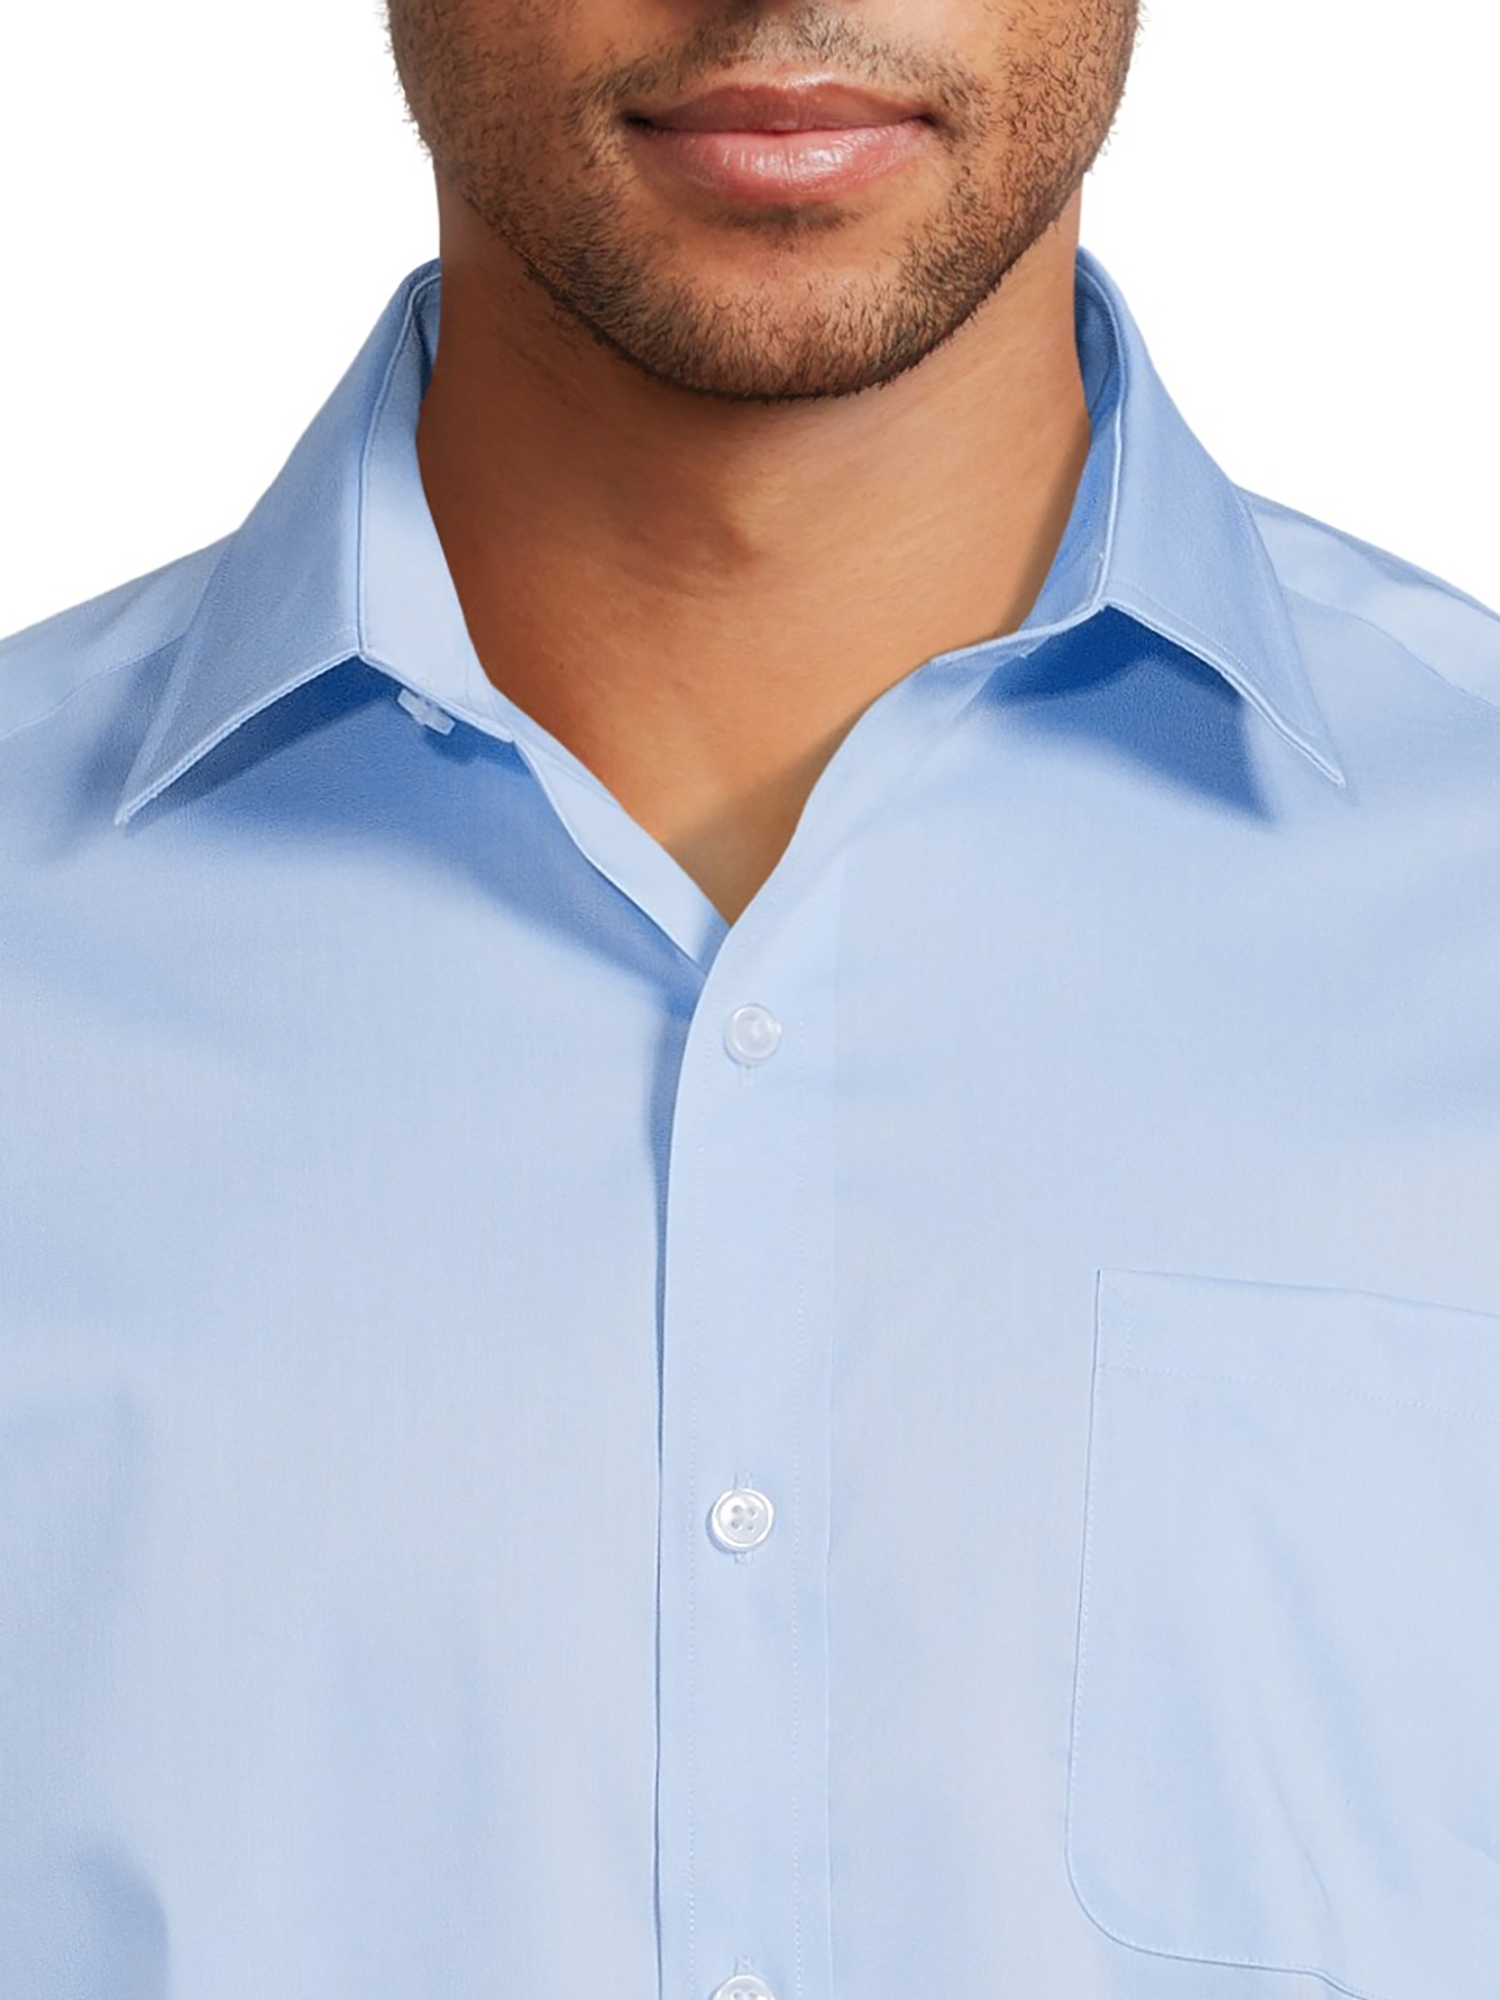 George Men's Classic Dress Shirt with Long Sleeves, Sizes S-3XL - image 2 of 5